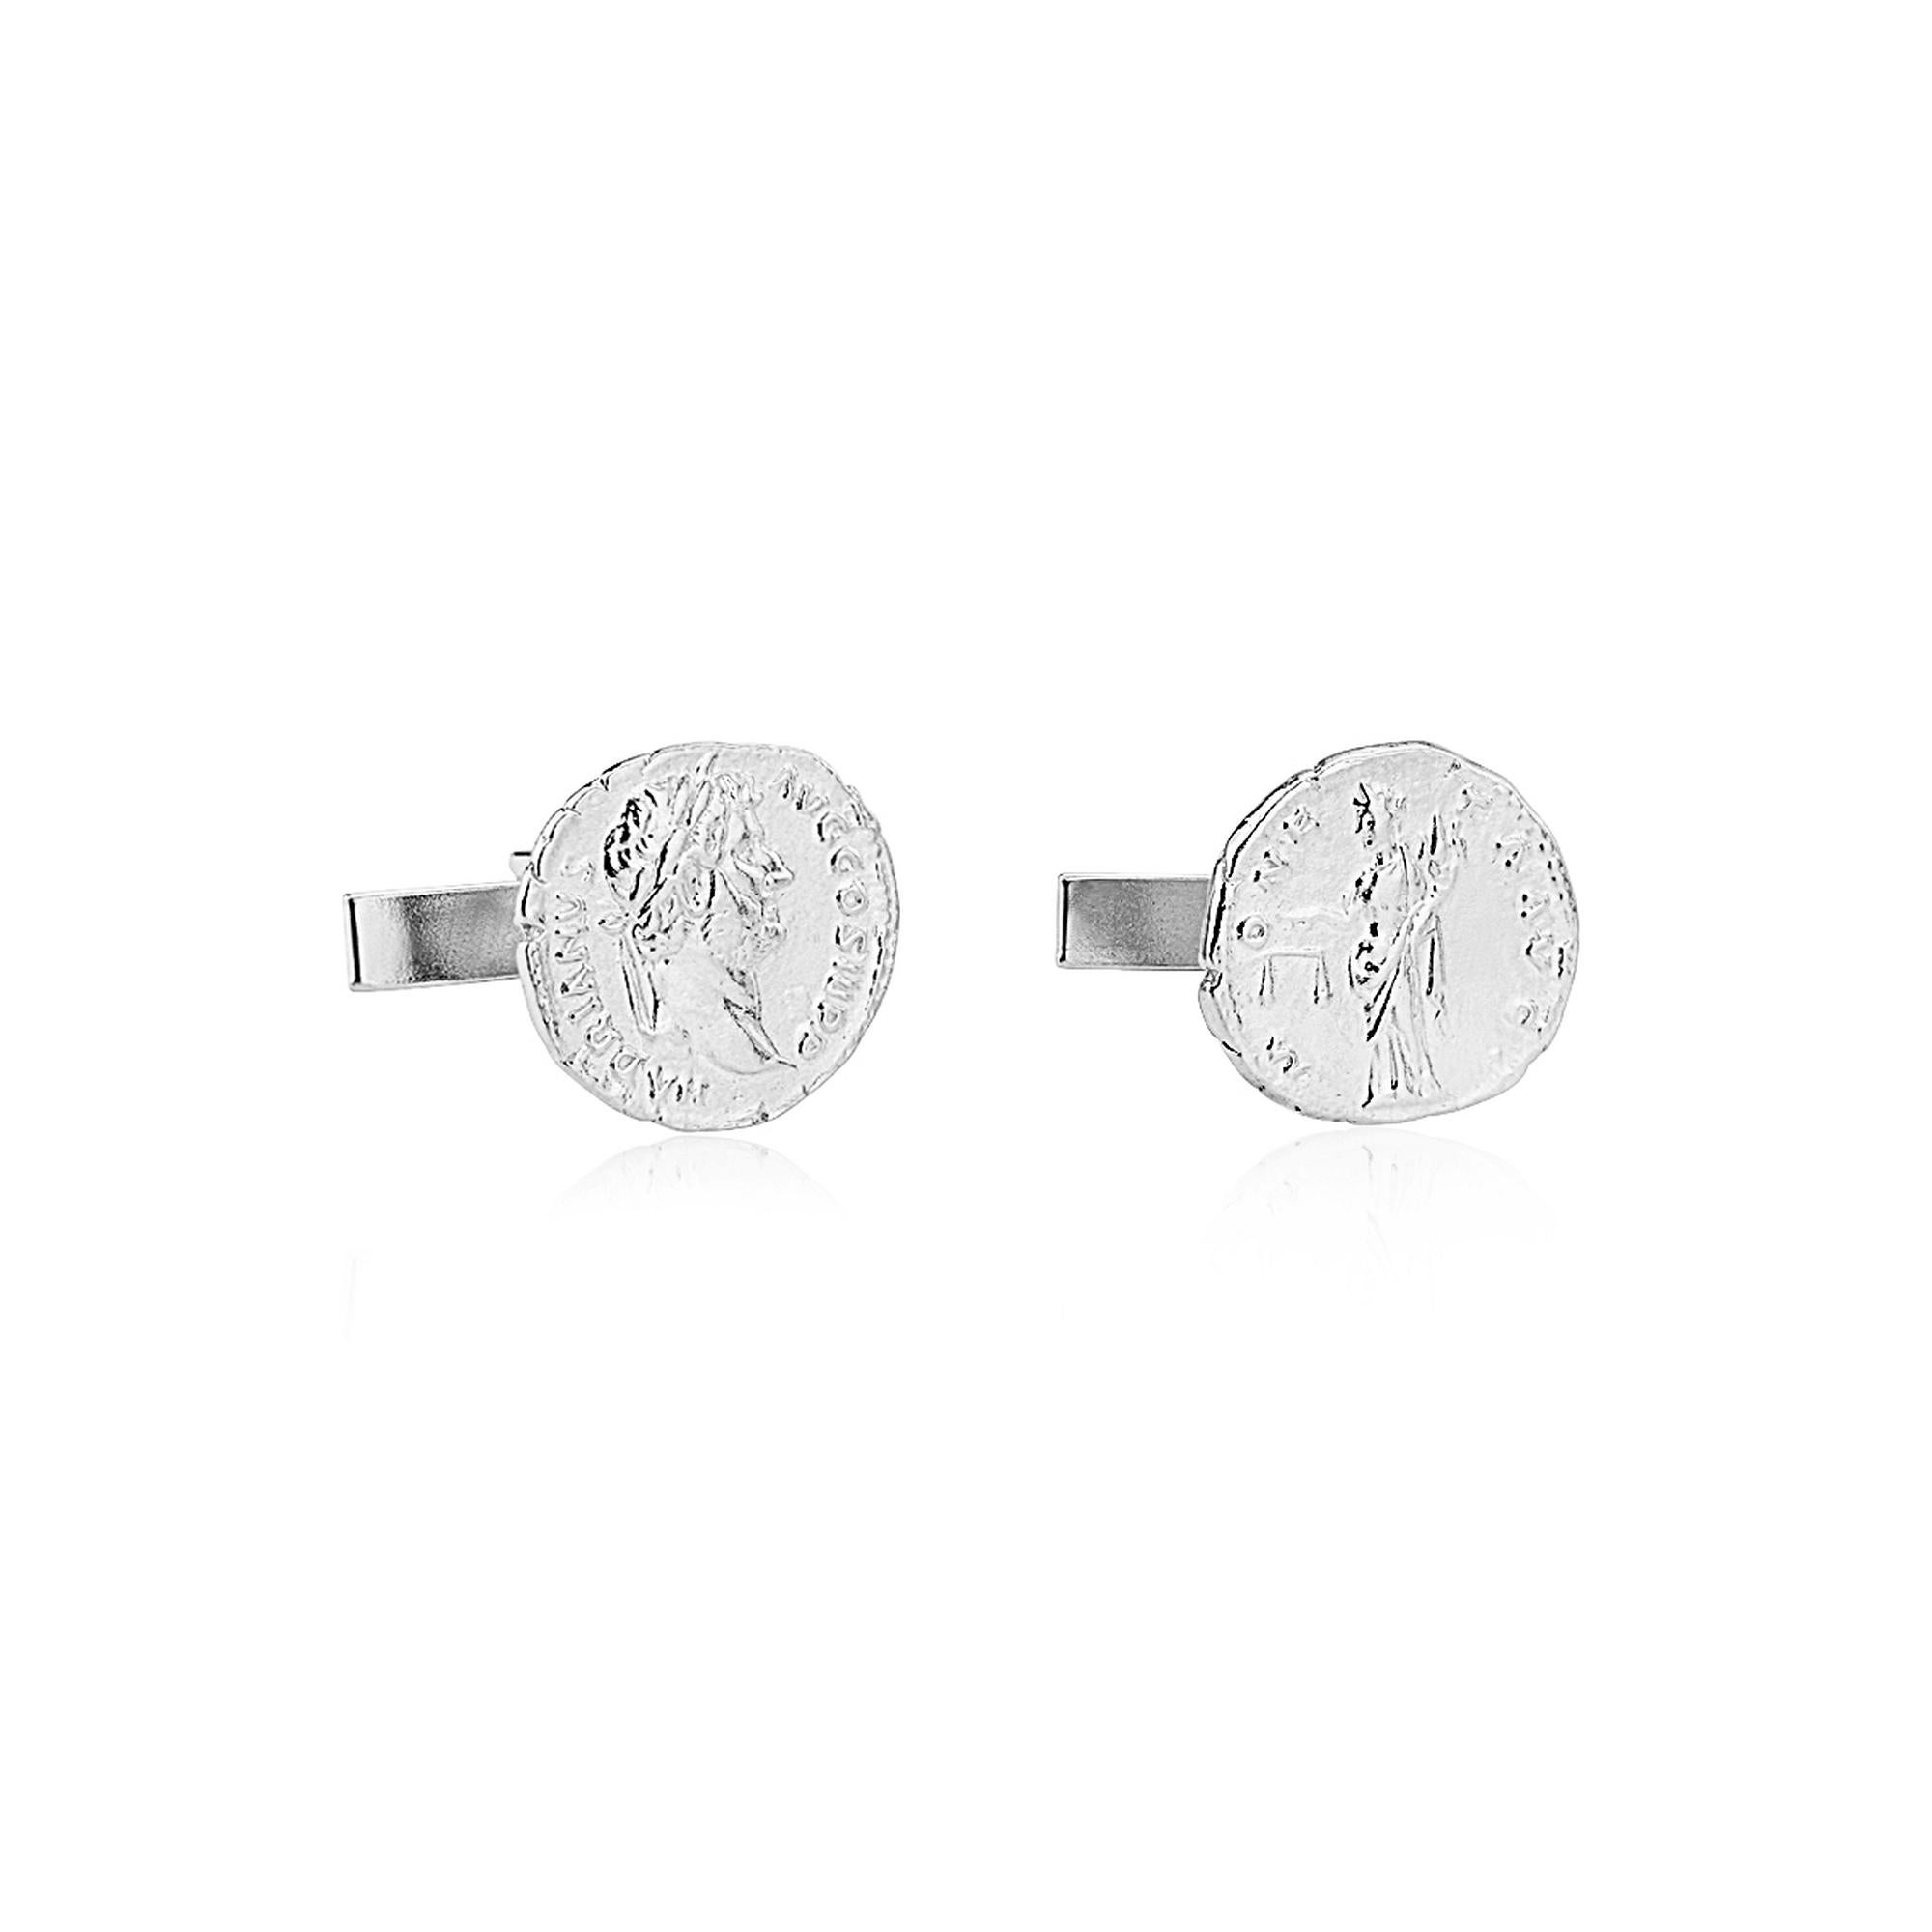 Emperor Hadrian Cufflinks in Sterling Silver In New Condition For Sale In London, GB